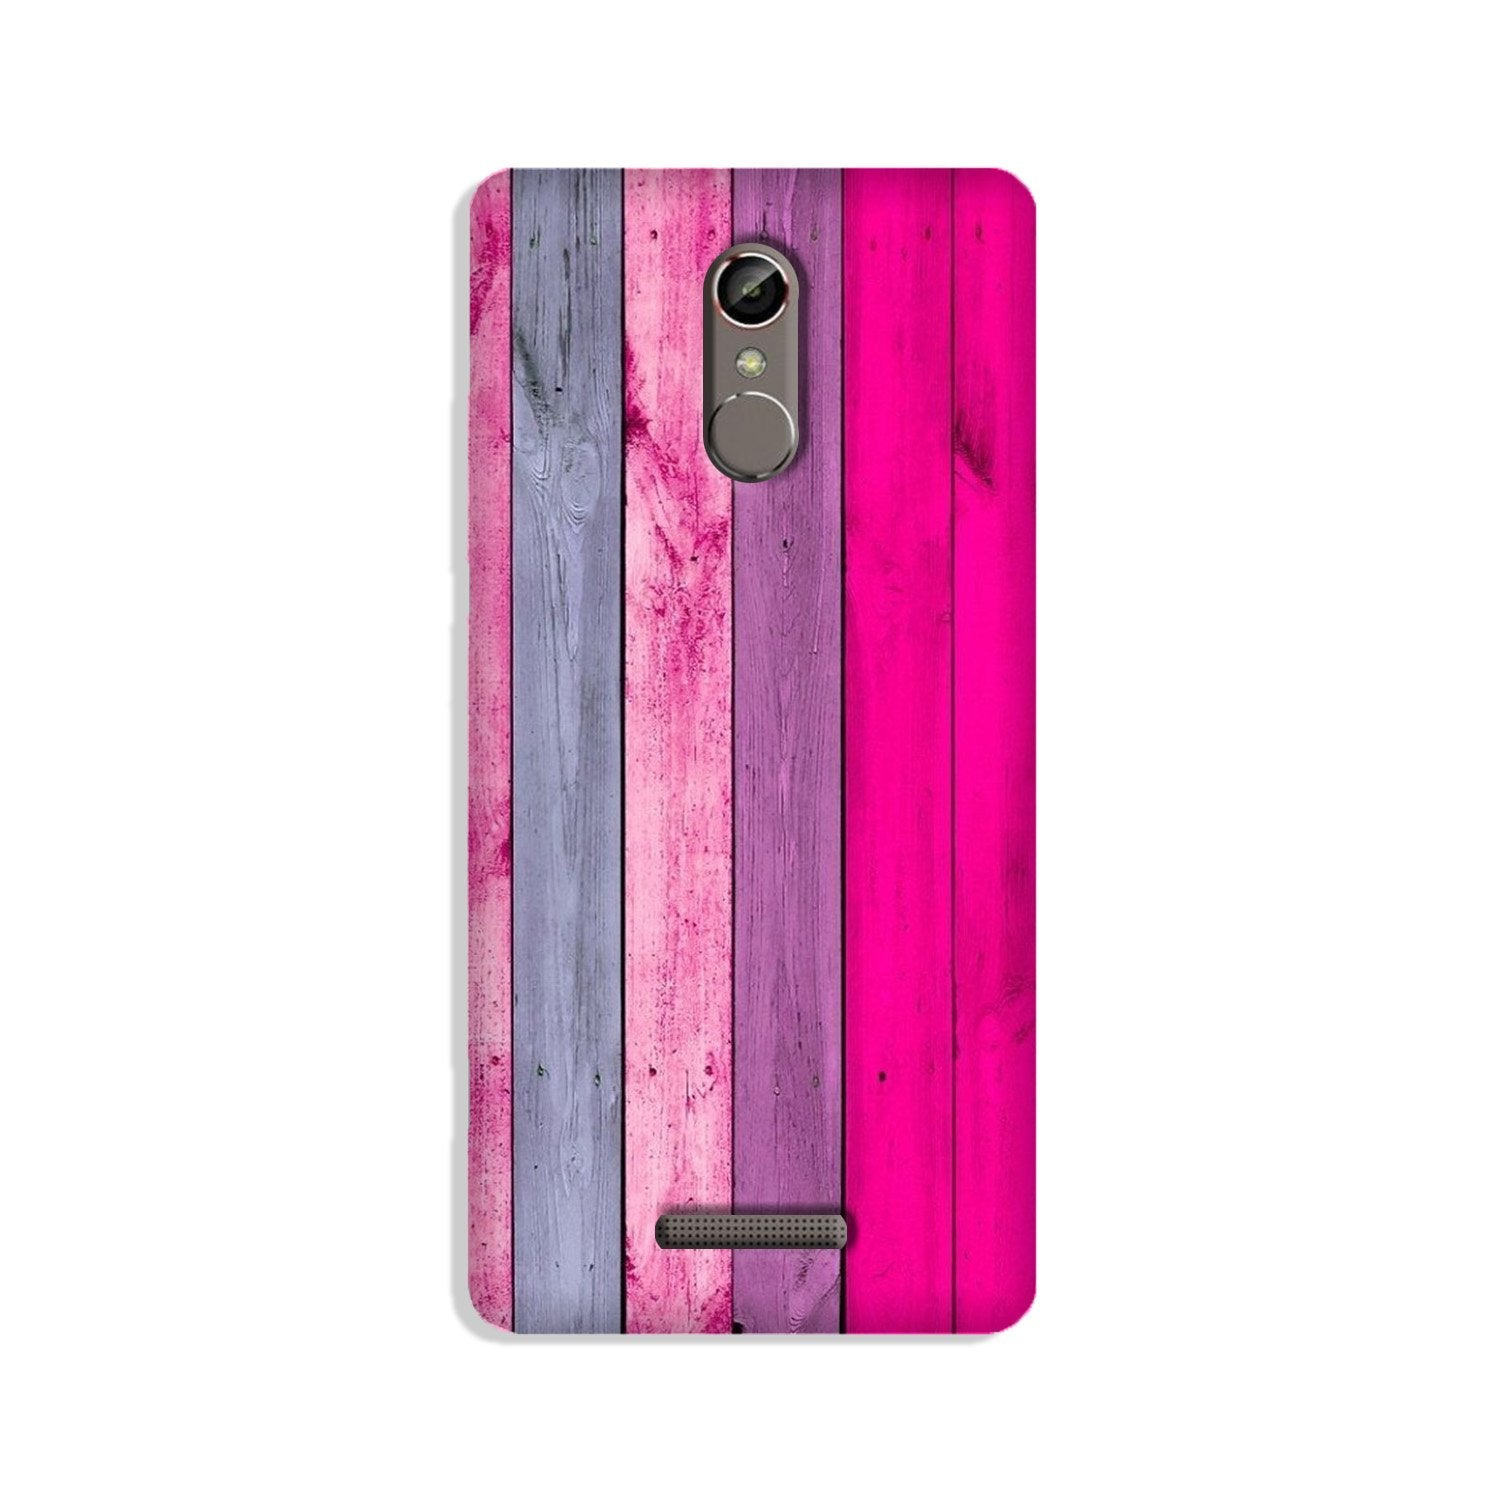 Wooden look Case for Gionee S6s